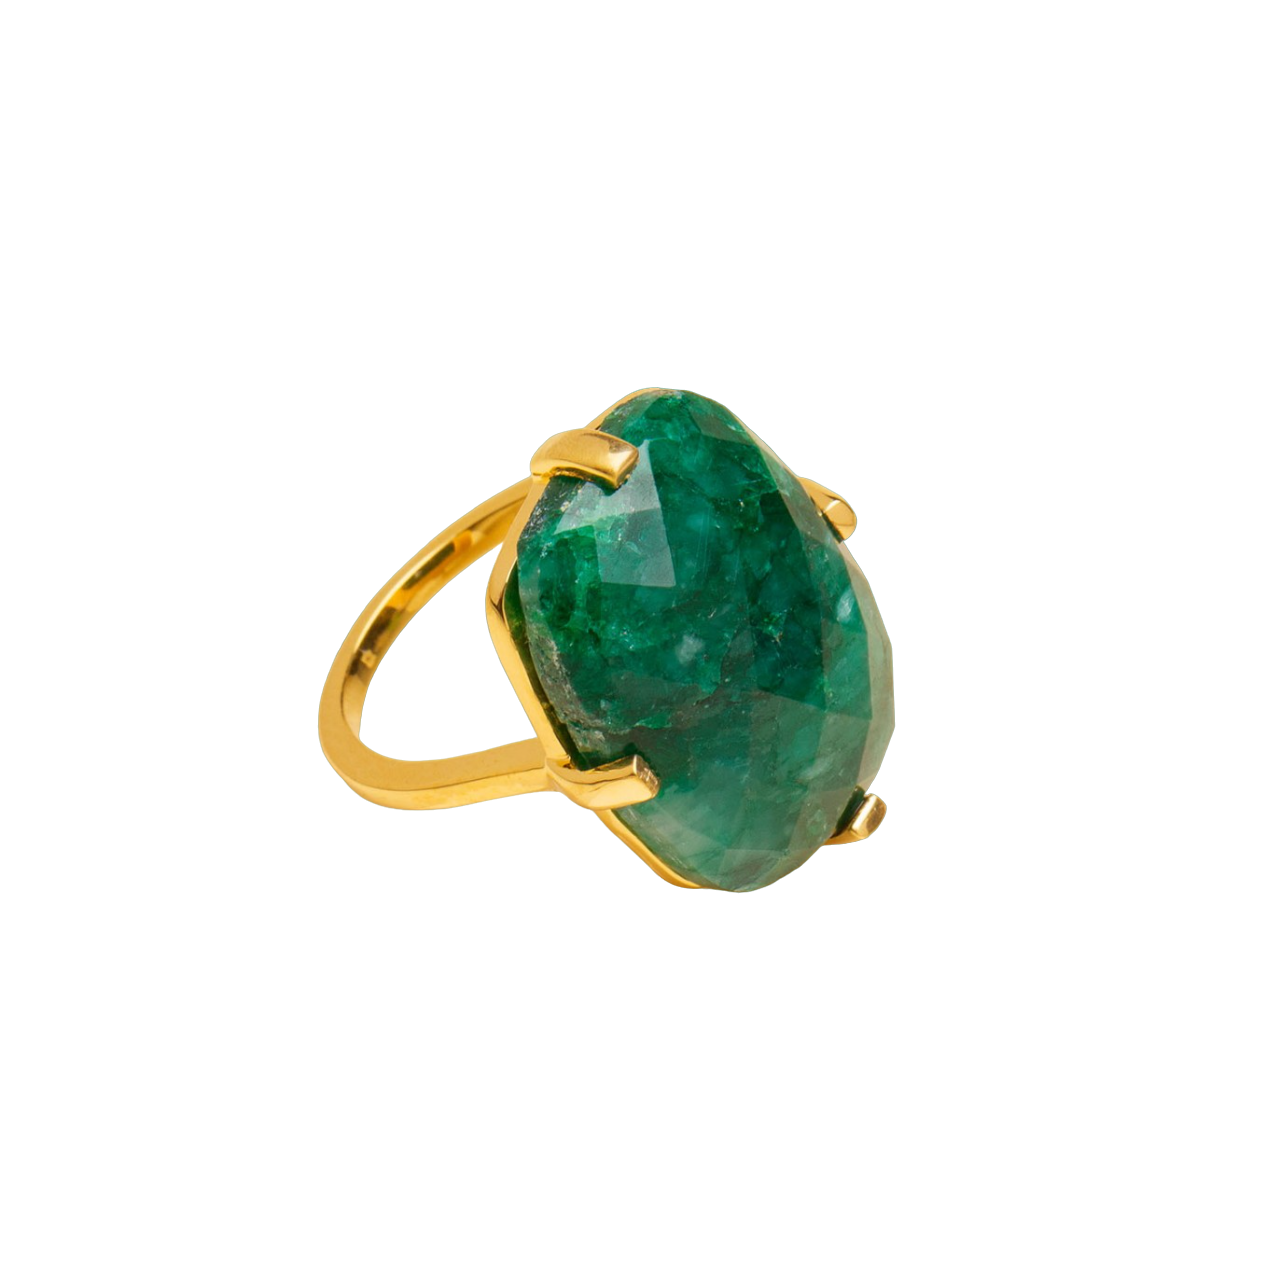 EMERALD RECTANGLE RING